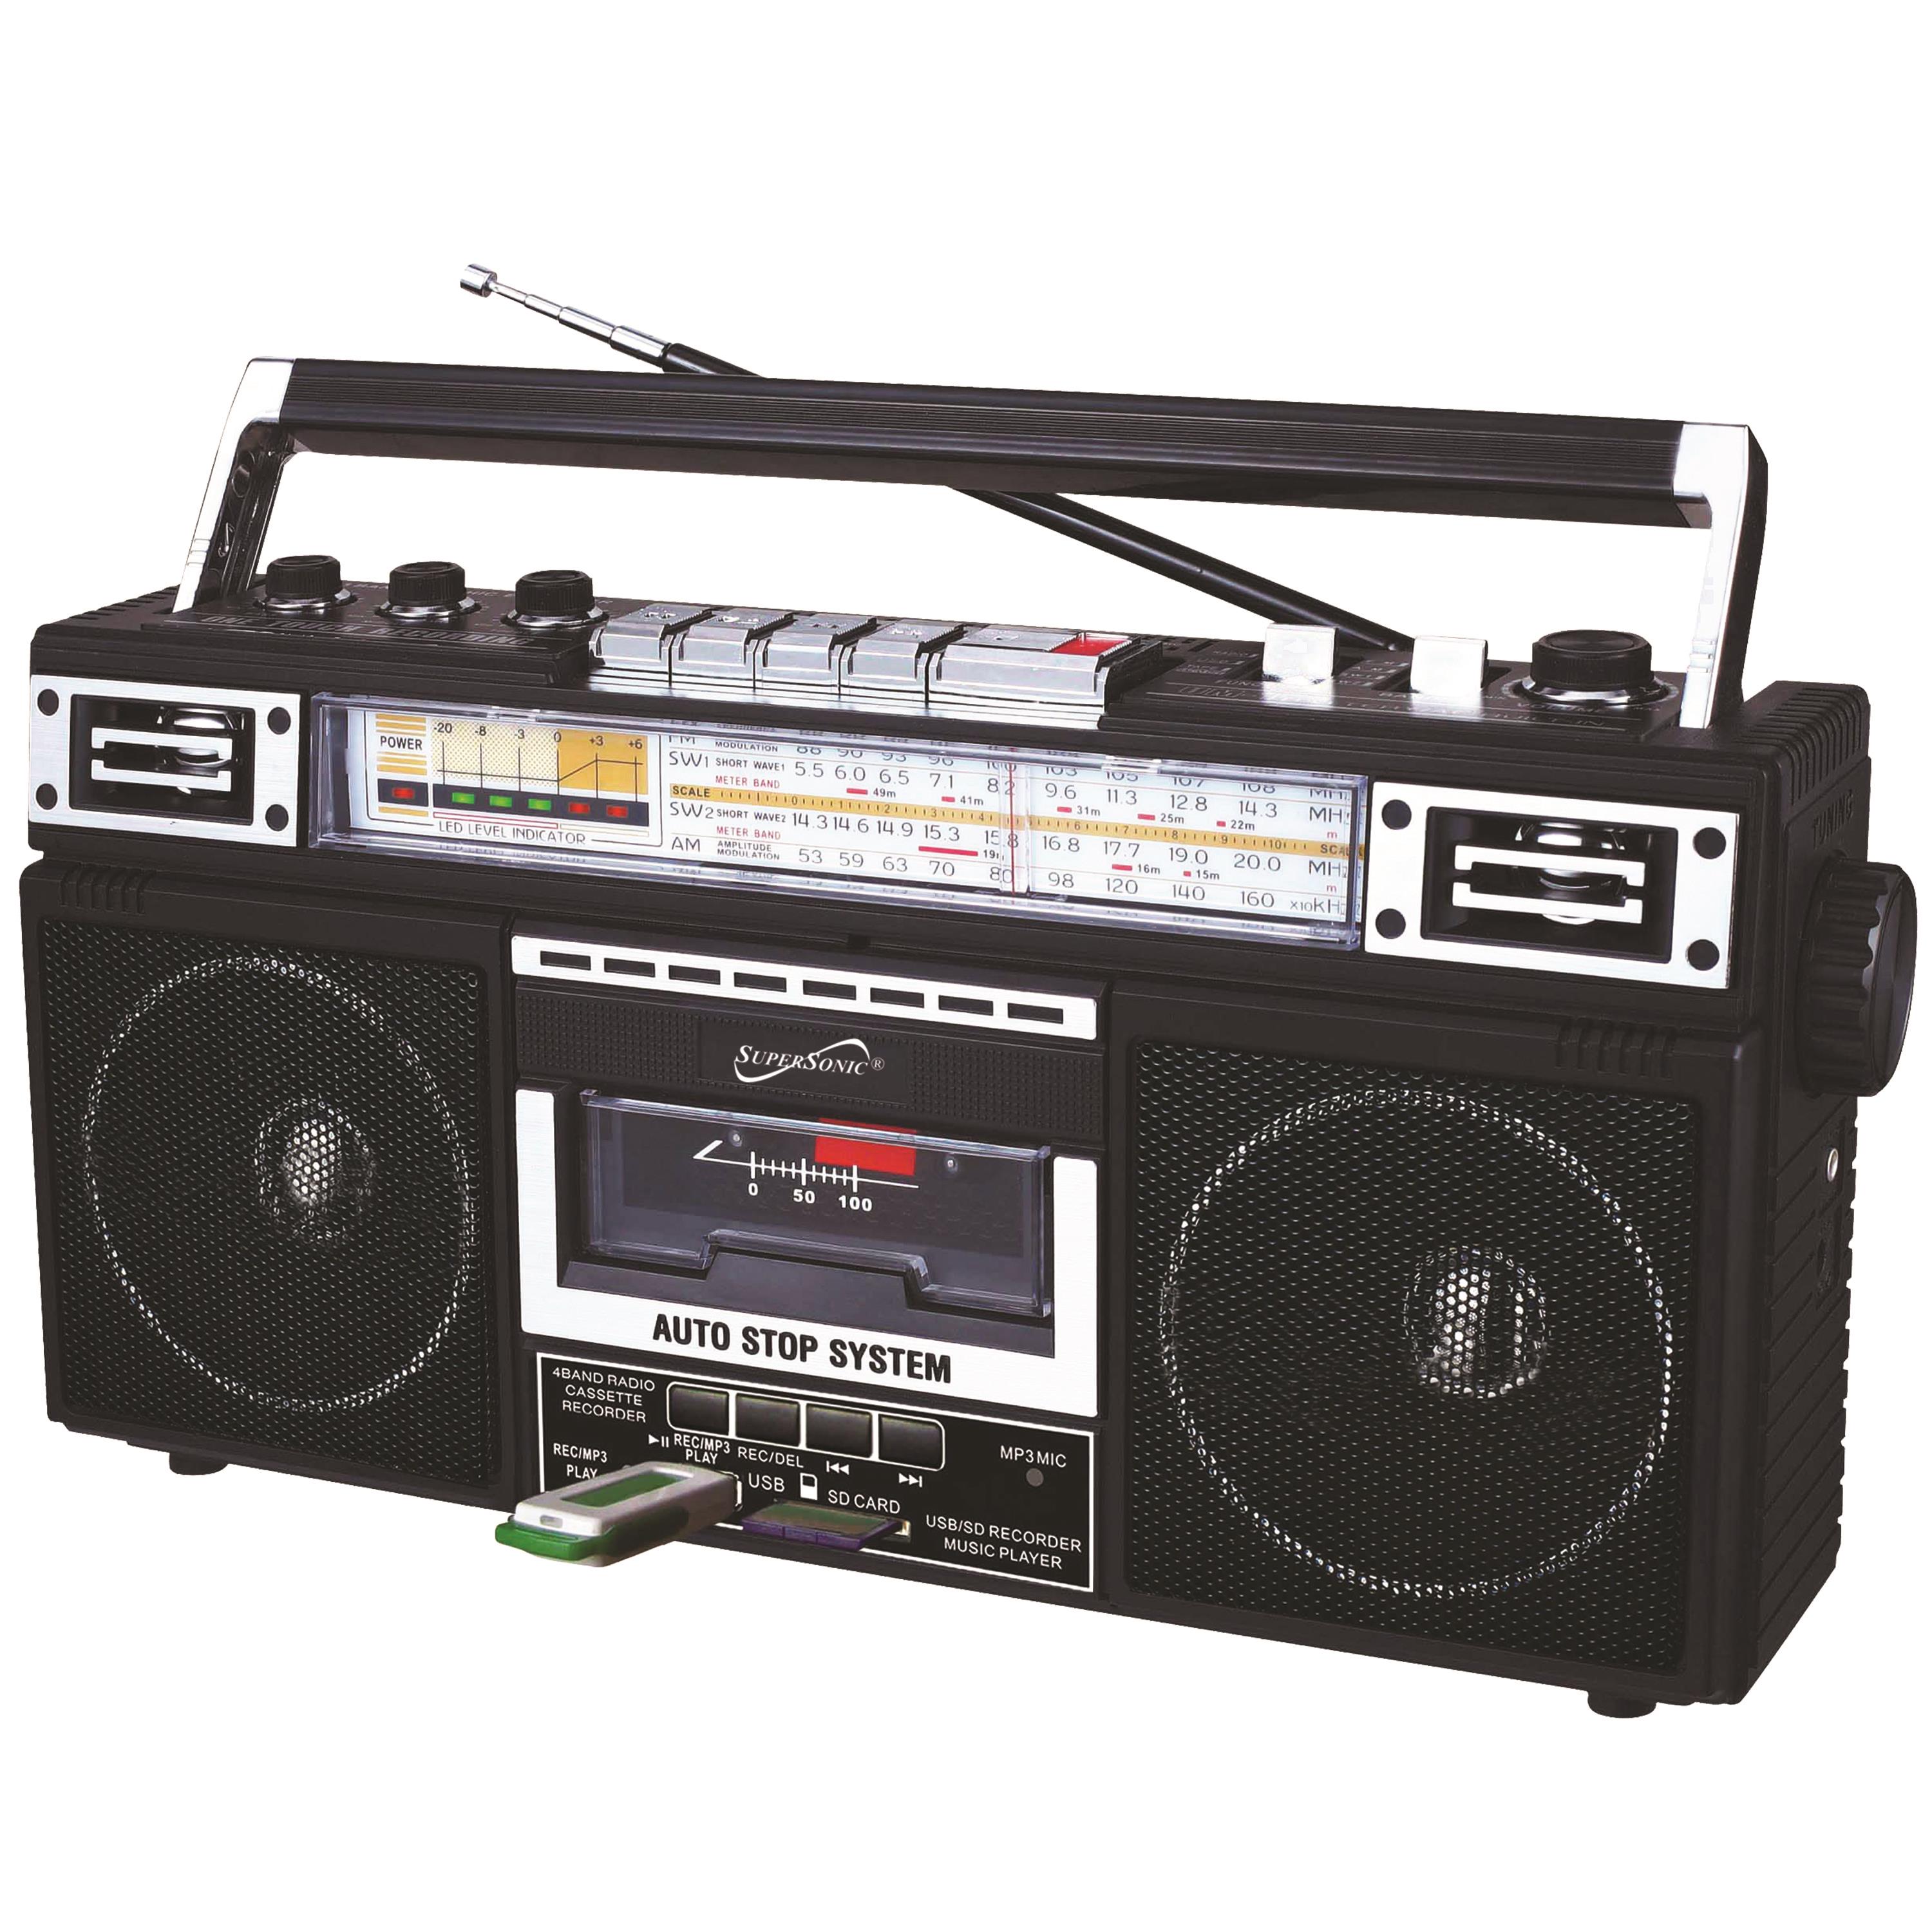 SuperSonic - Retro 4 Band Radio & Cassette Player with Bluetooth